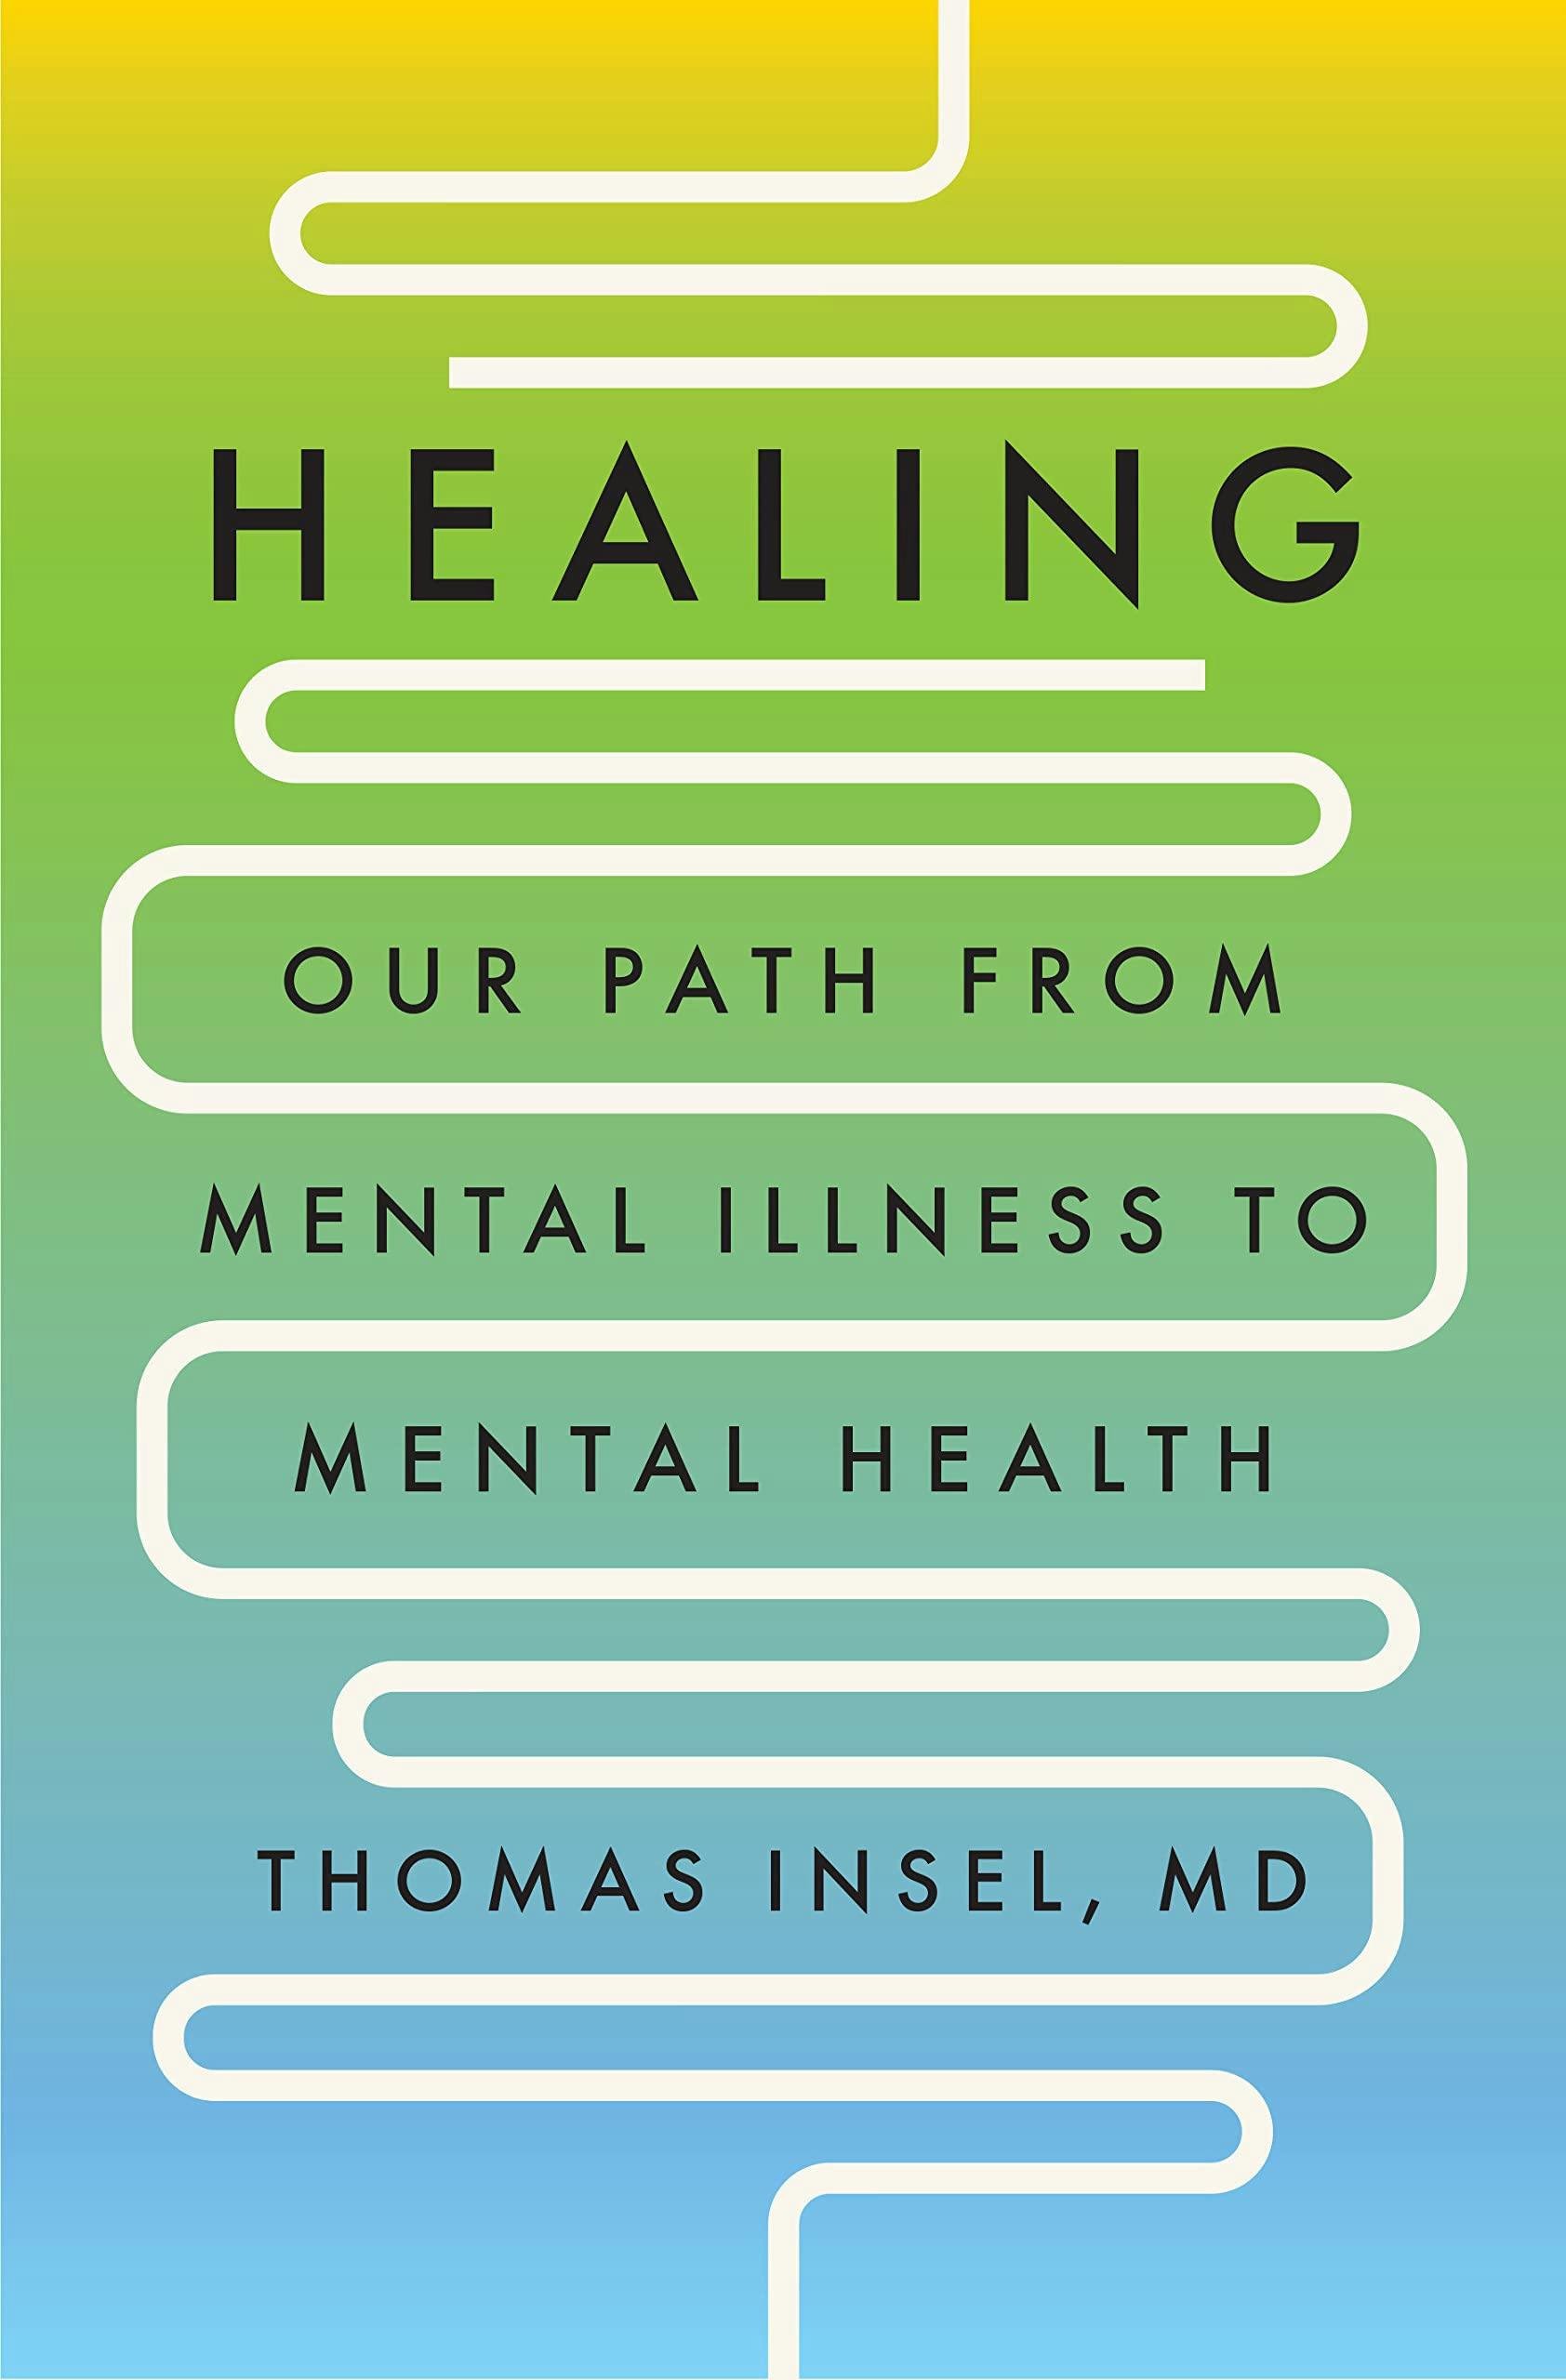 Thomas Insel, MD’s, book contains several highly valuable lessons for psychiatry and beyond.